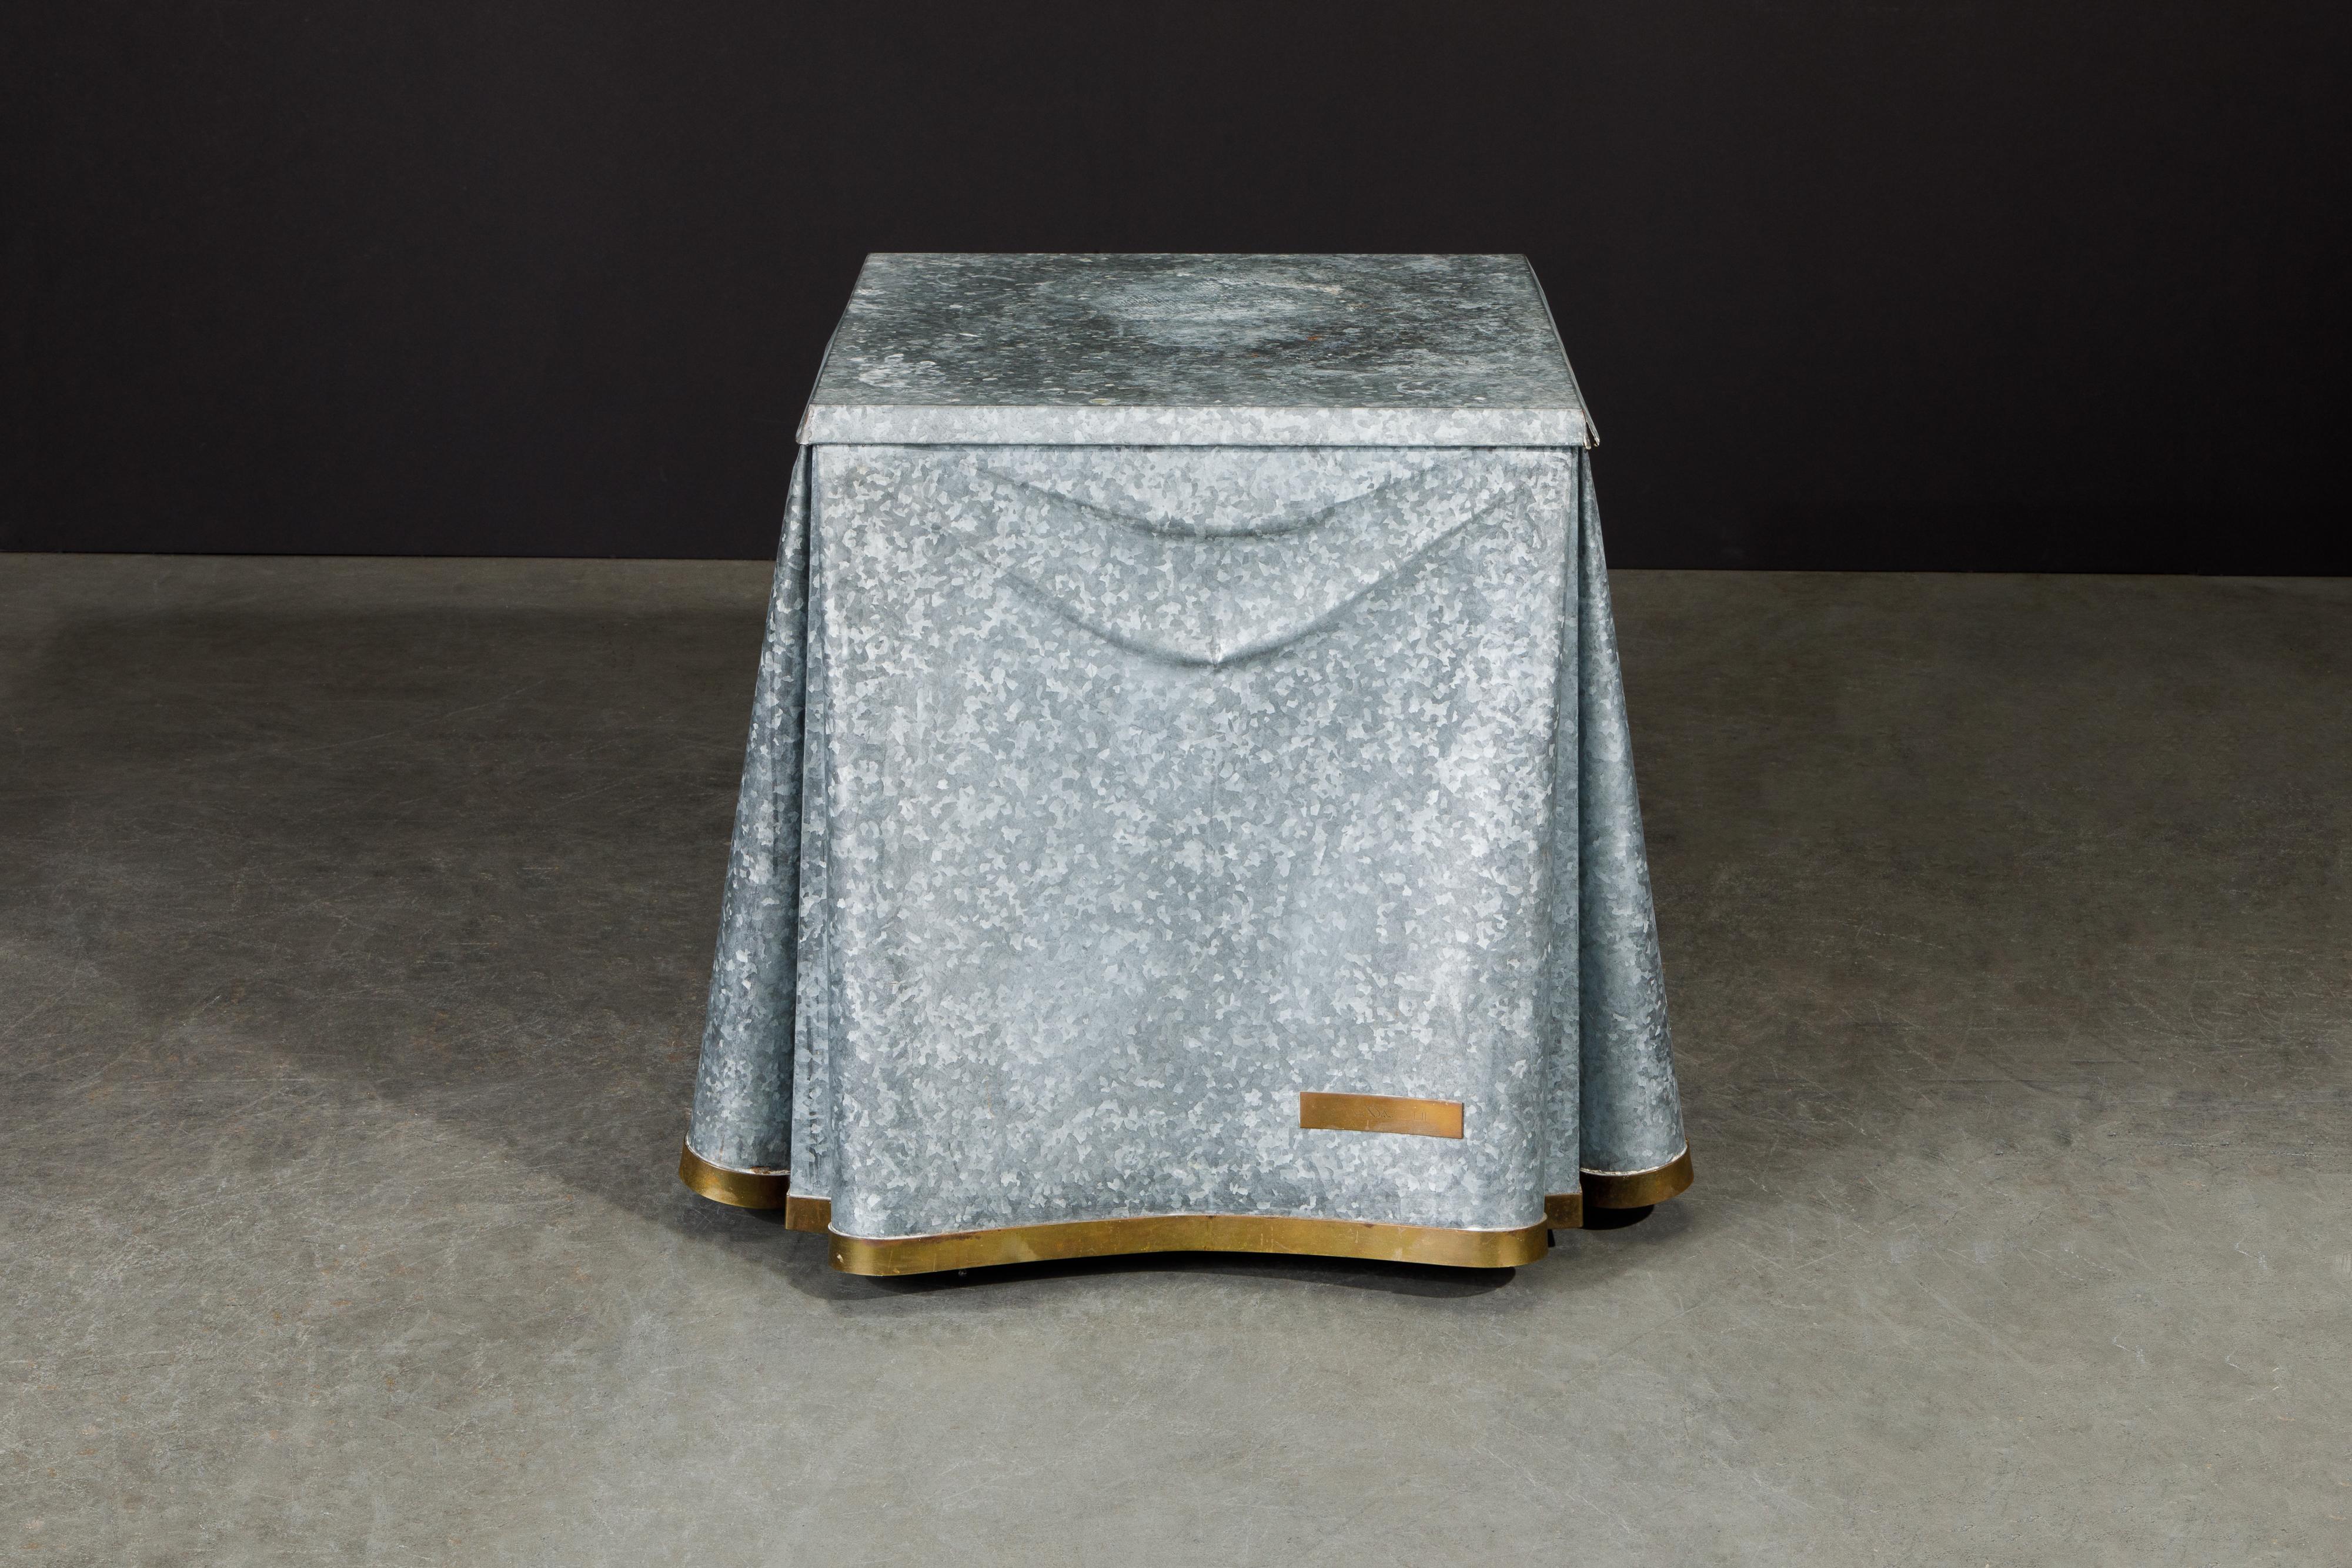 This exceptionally rare and high-sought after collectors item is the John Dickinson model #107 drape end table with trompe-l'œil fabric motif in galvanized steel and brass binding. This piece of functional fine art is suited for a design collector,